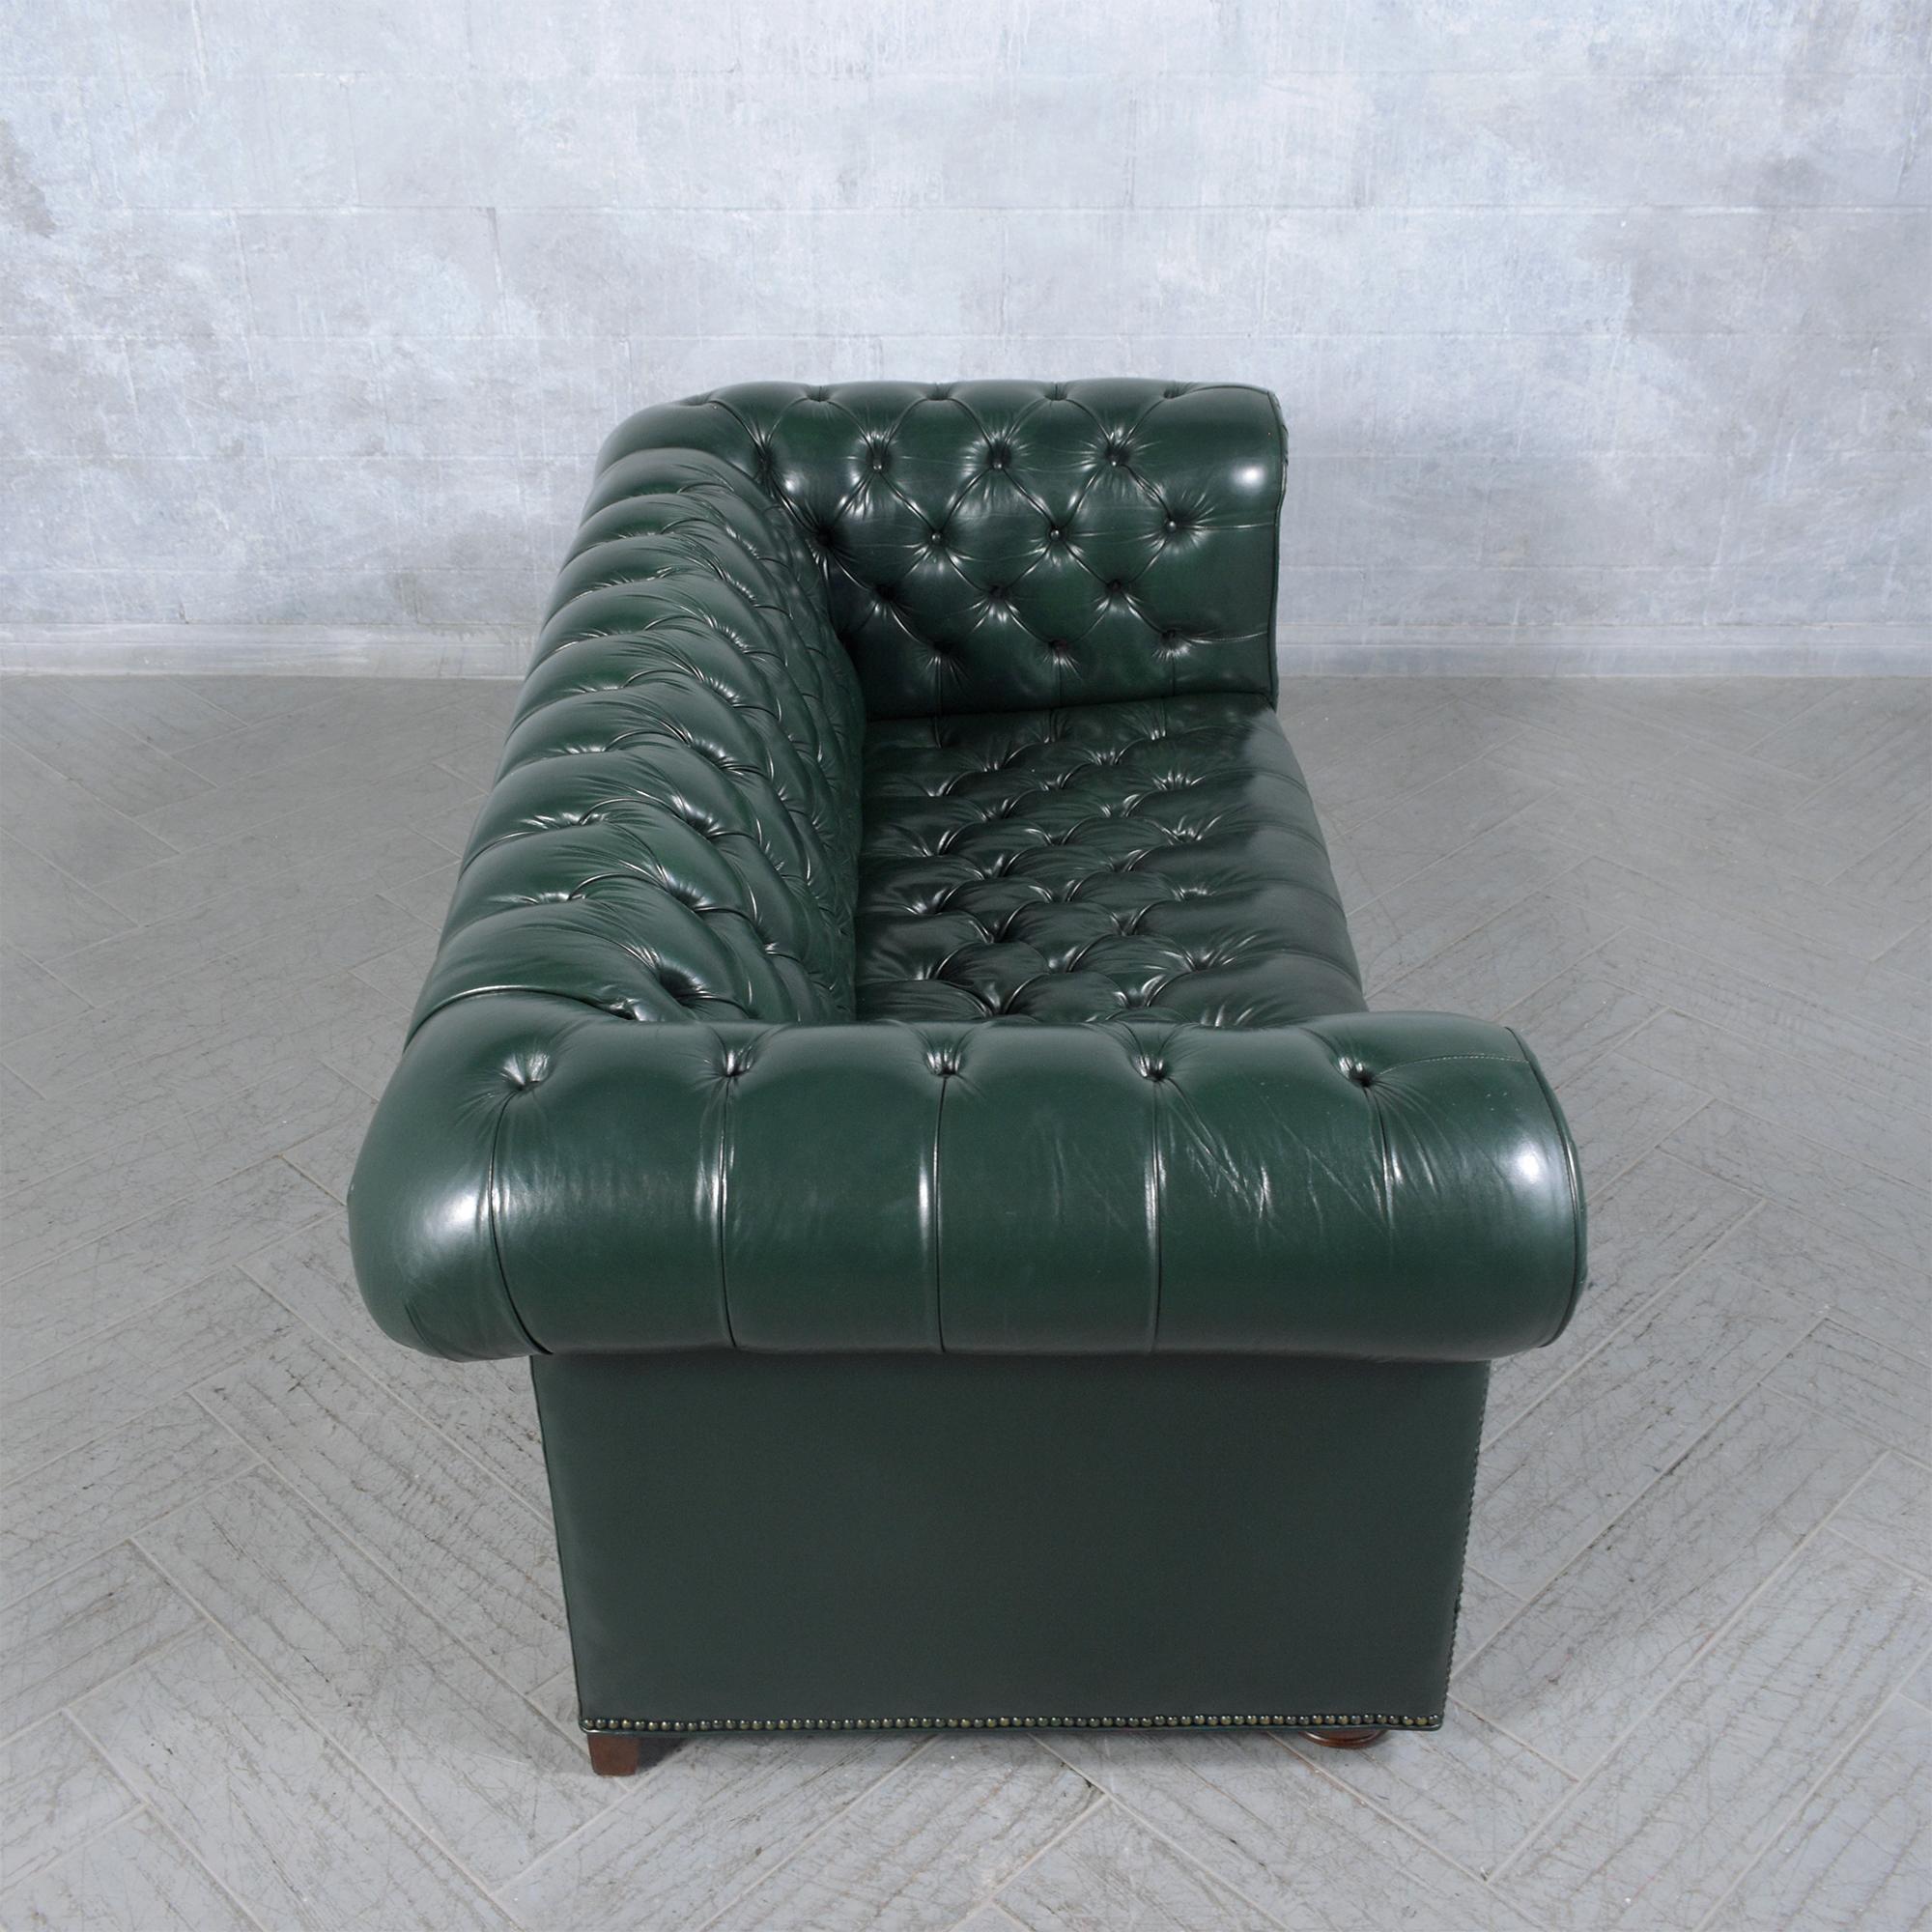 1970s Vintage Chesterfield Sofa: Emerald Green Leather with Elegant Carved Legs 6